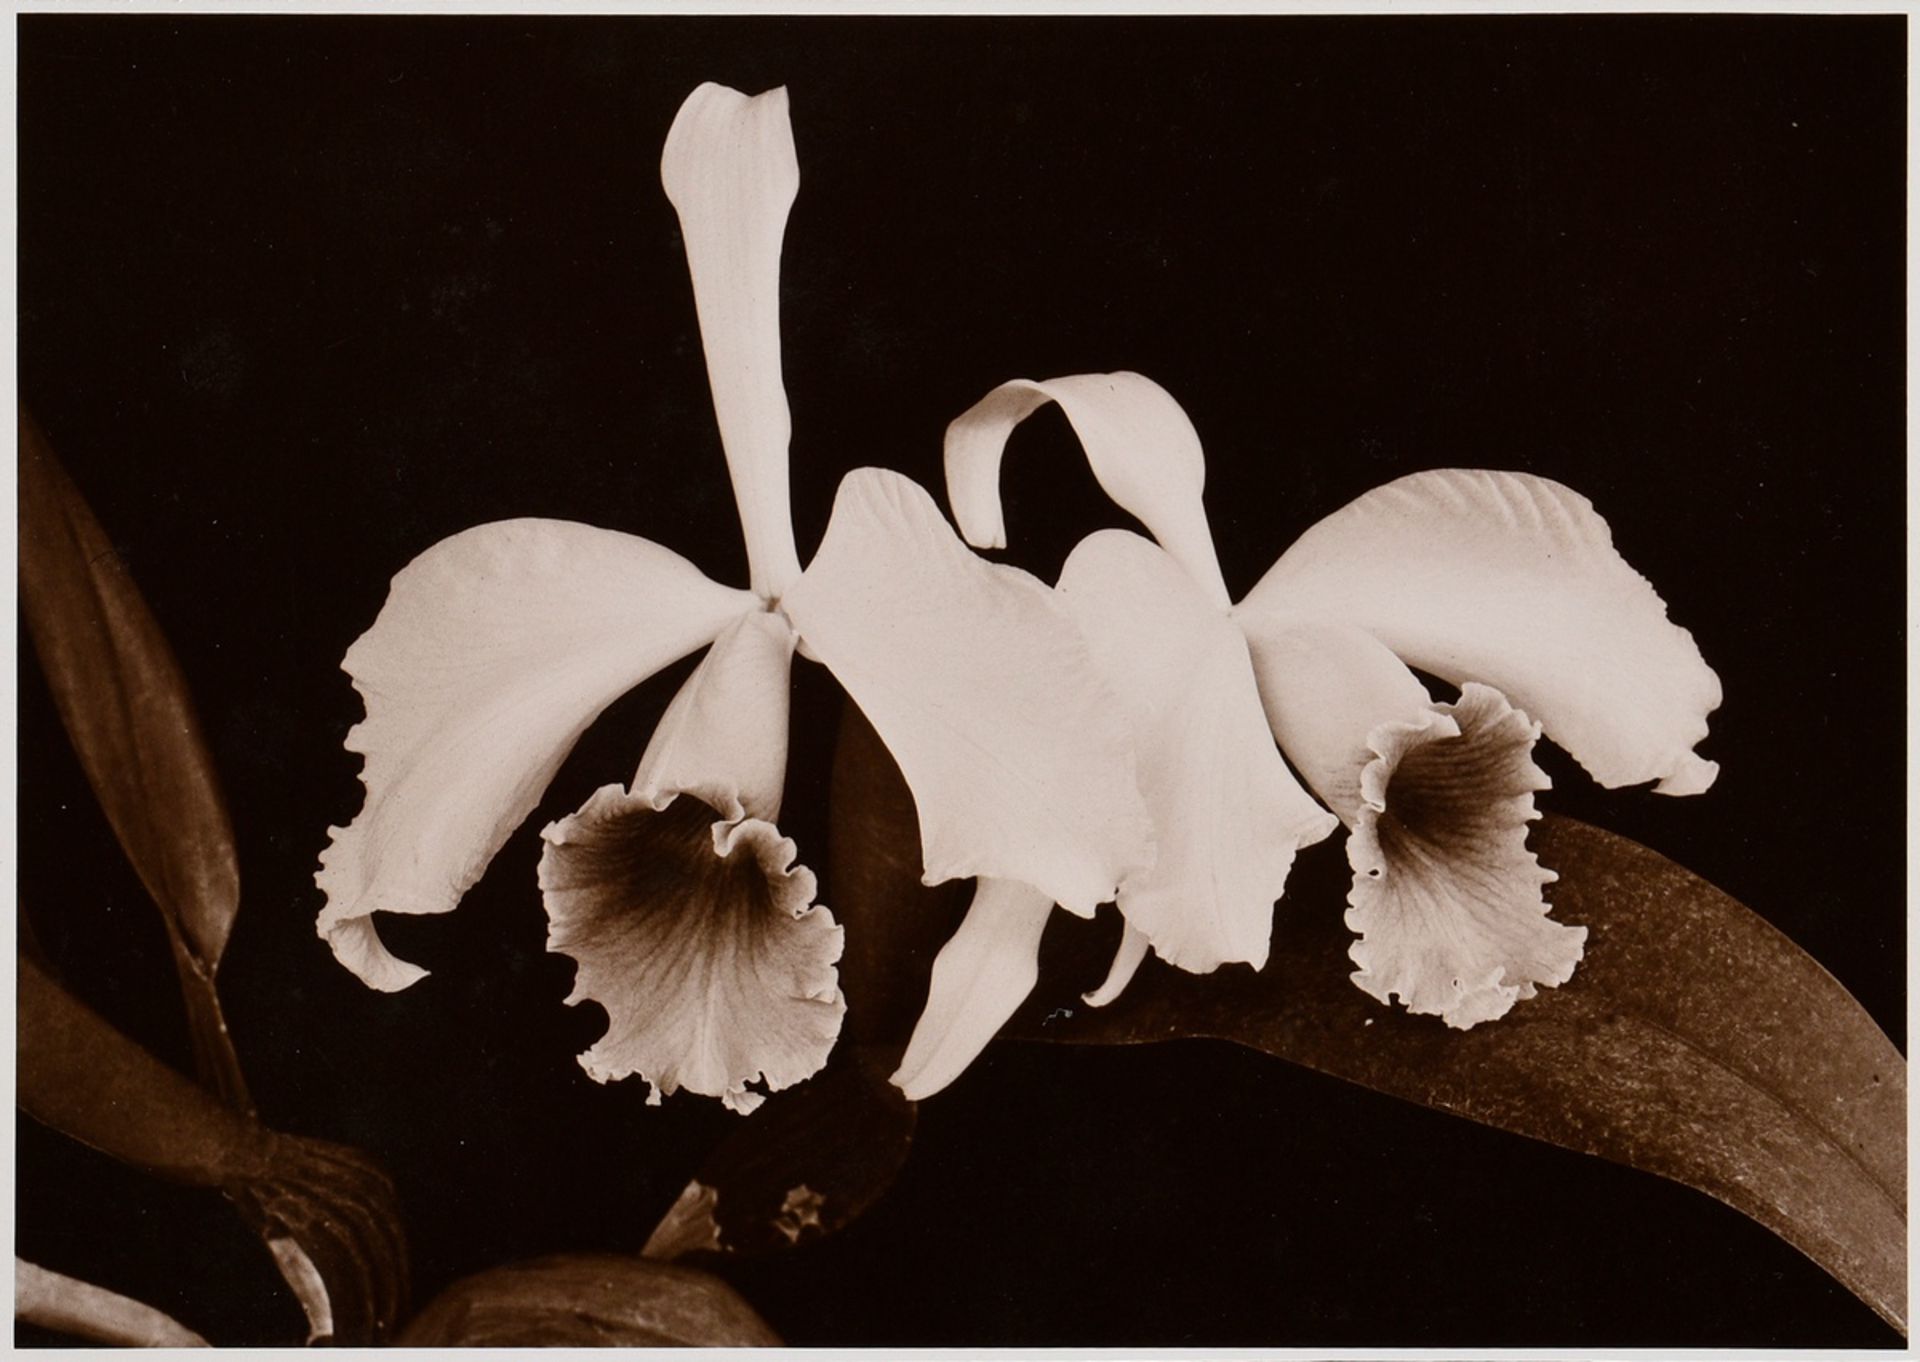 6 Koch, Fred (1904-1947) "Ice Crystals, Mushrooms, Animals", photographs mounted on cardboard, insc - Image 18 of 20